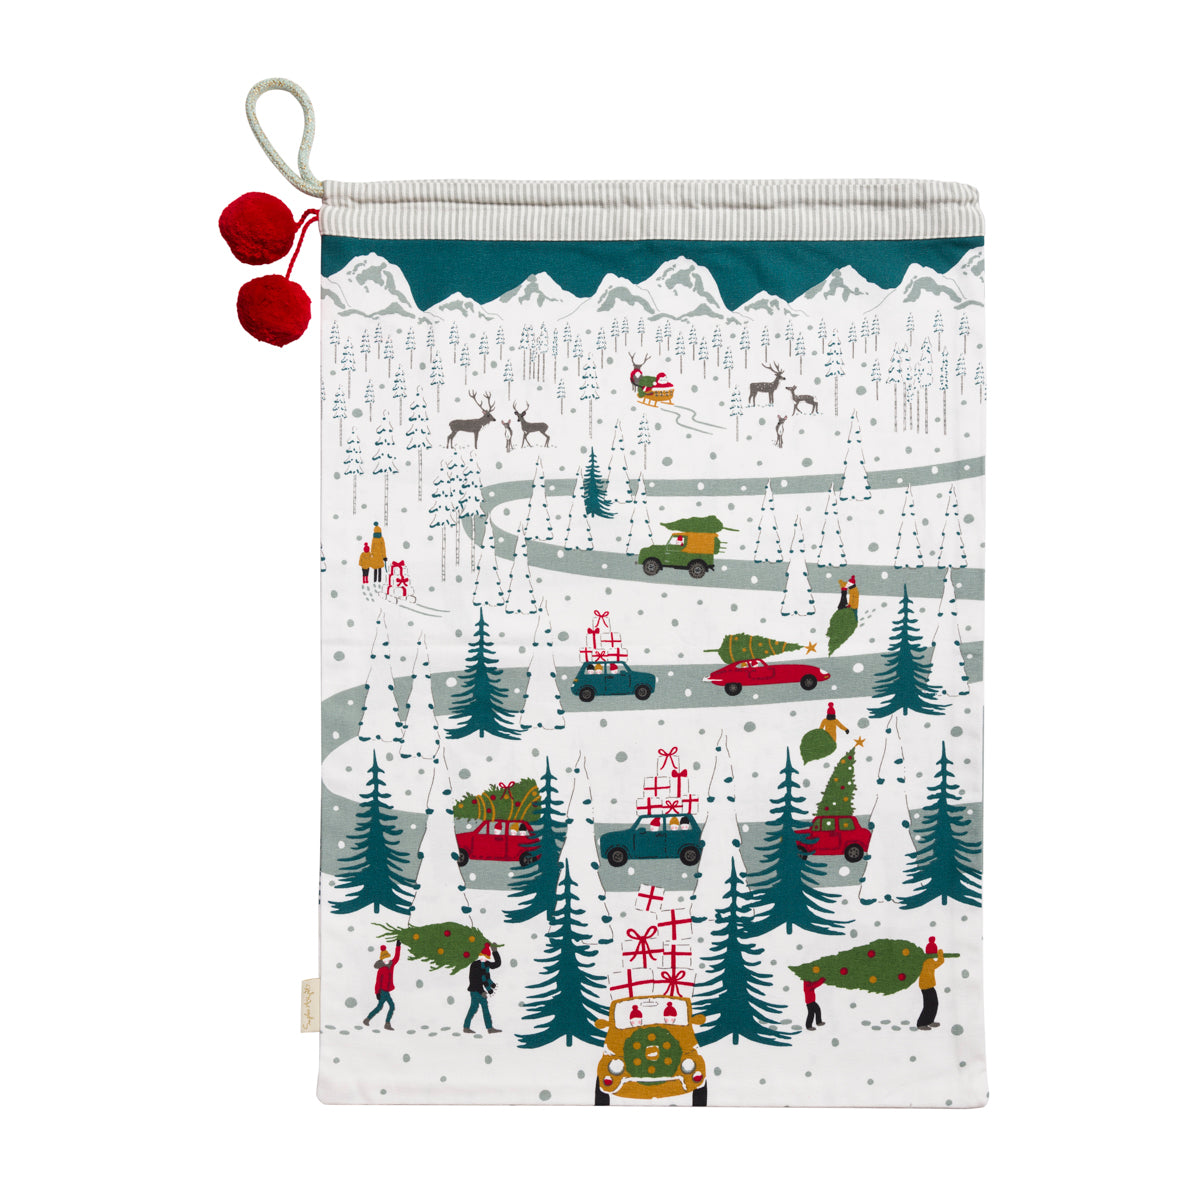 Home for Christmas 'Tis the Season Sack by Sophie Allport